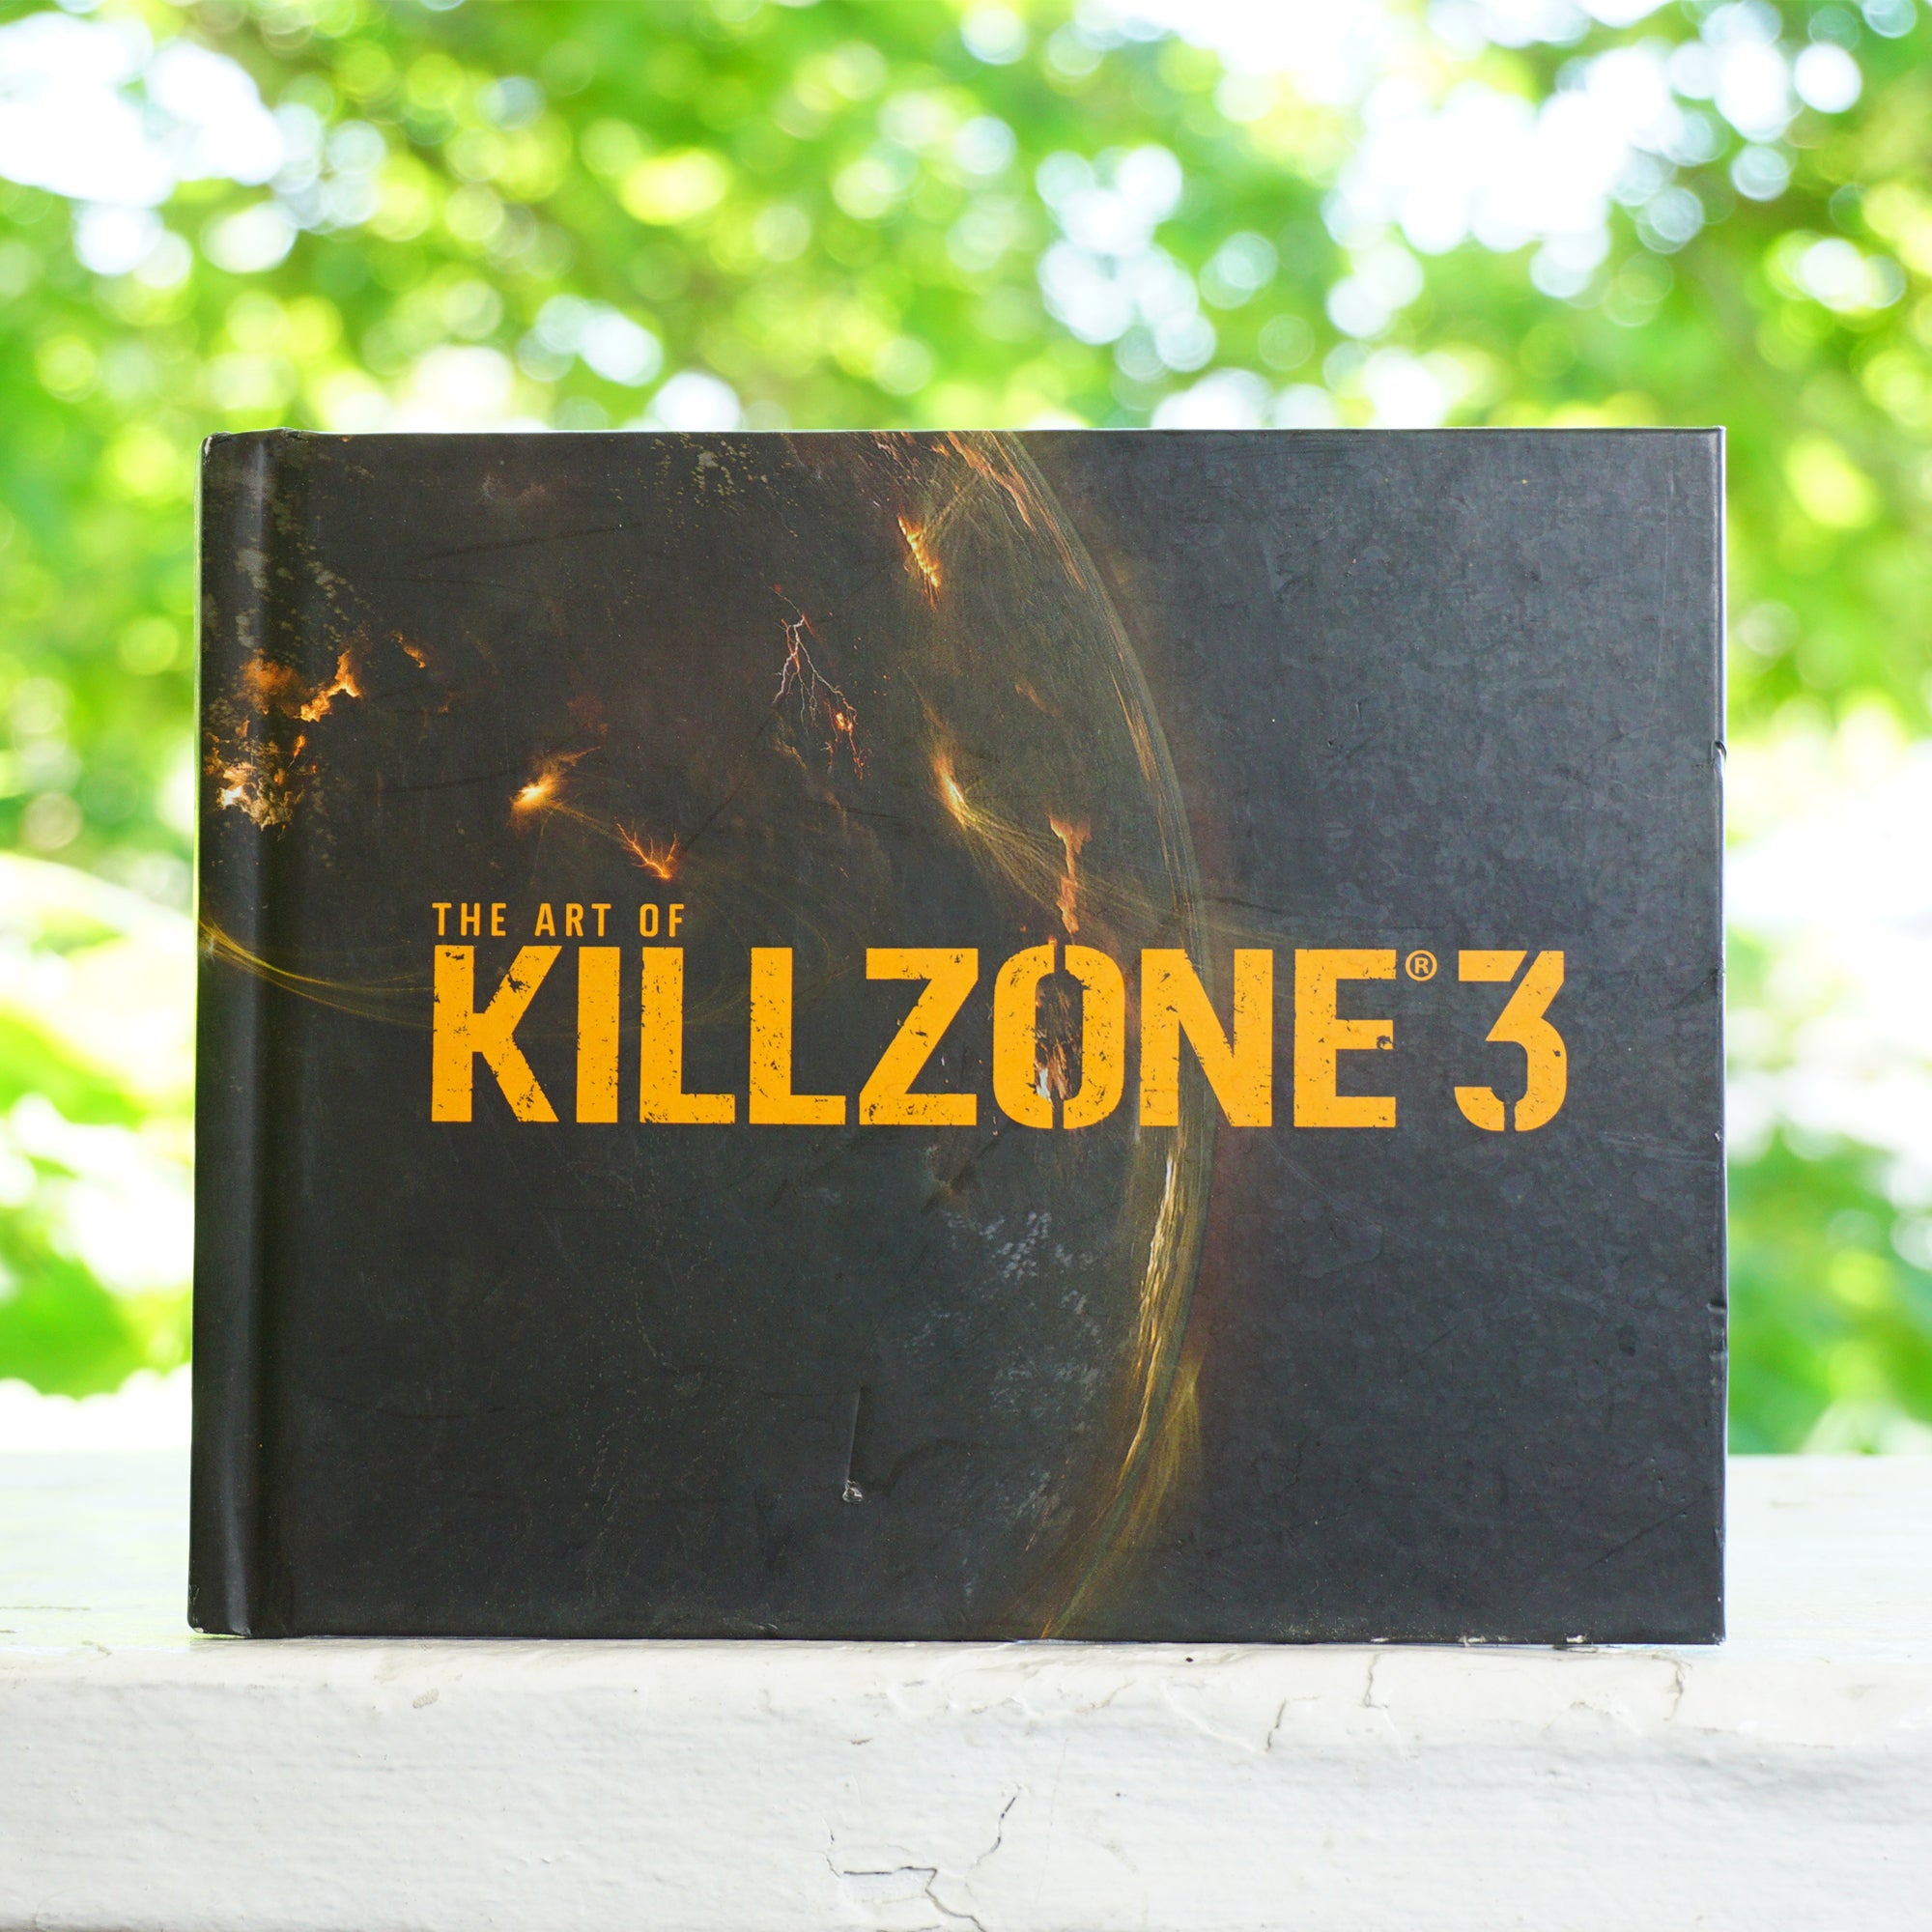 2011 Sony THE ART OF KILLZONE 3 Brand New Hardcover. Published by Penguin Books.